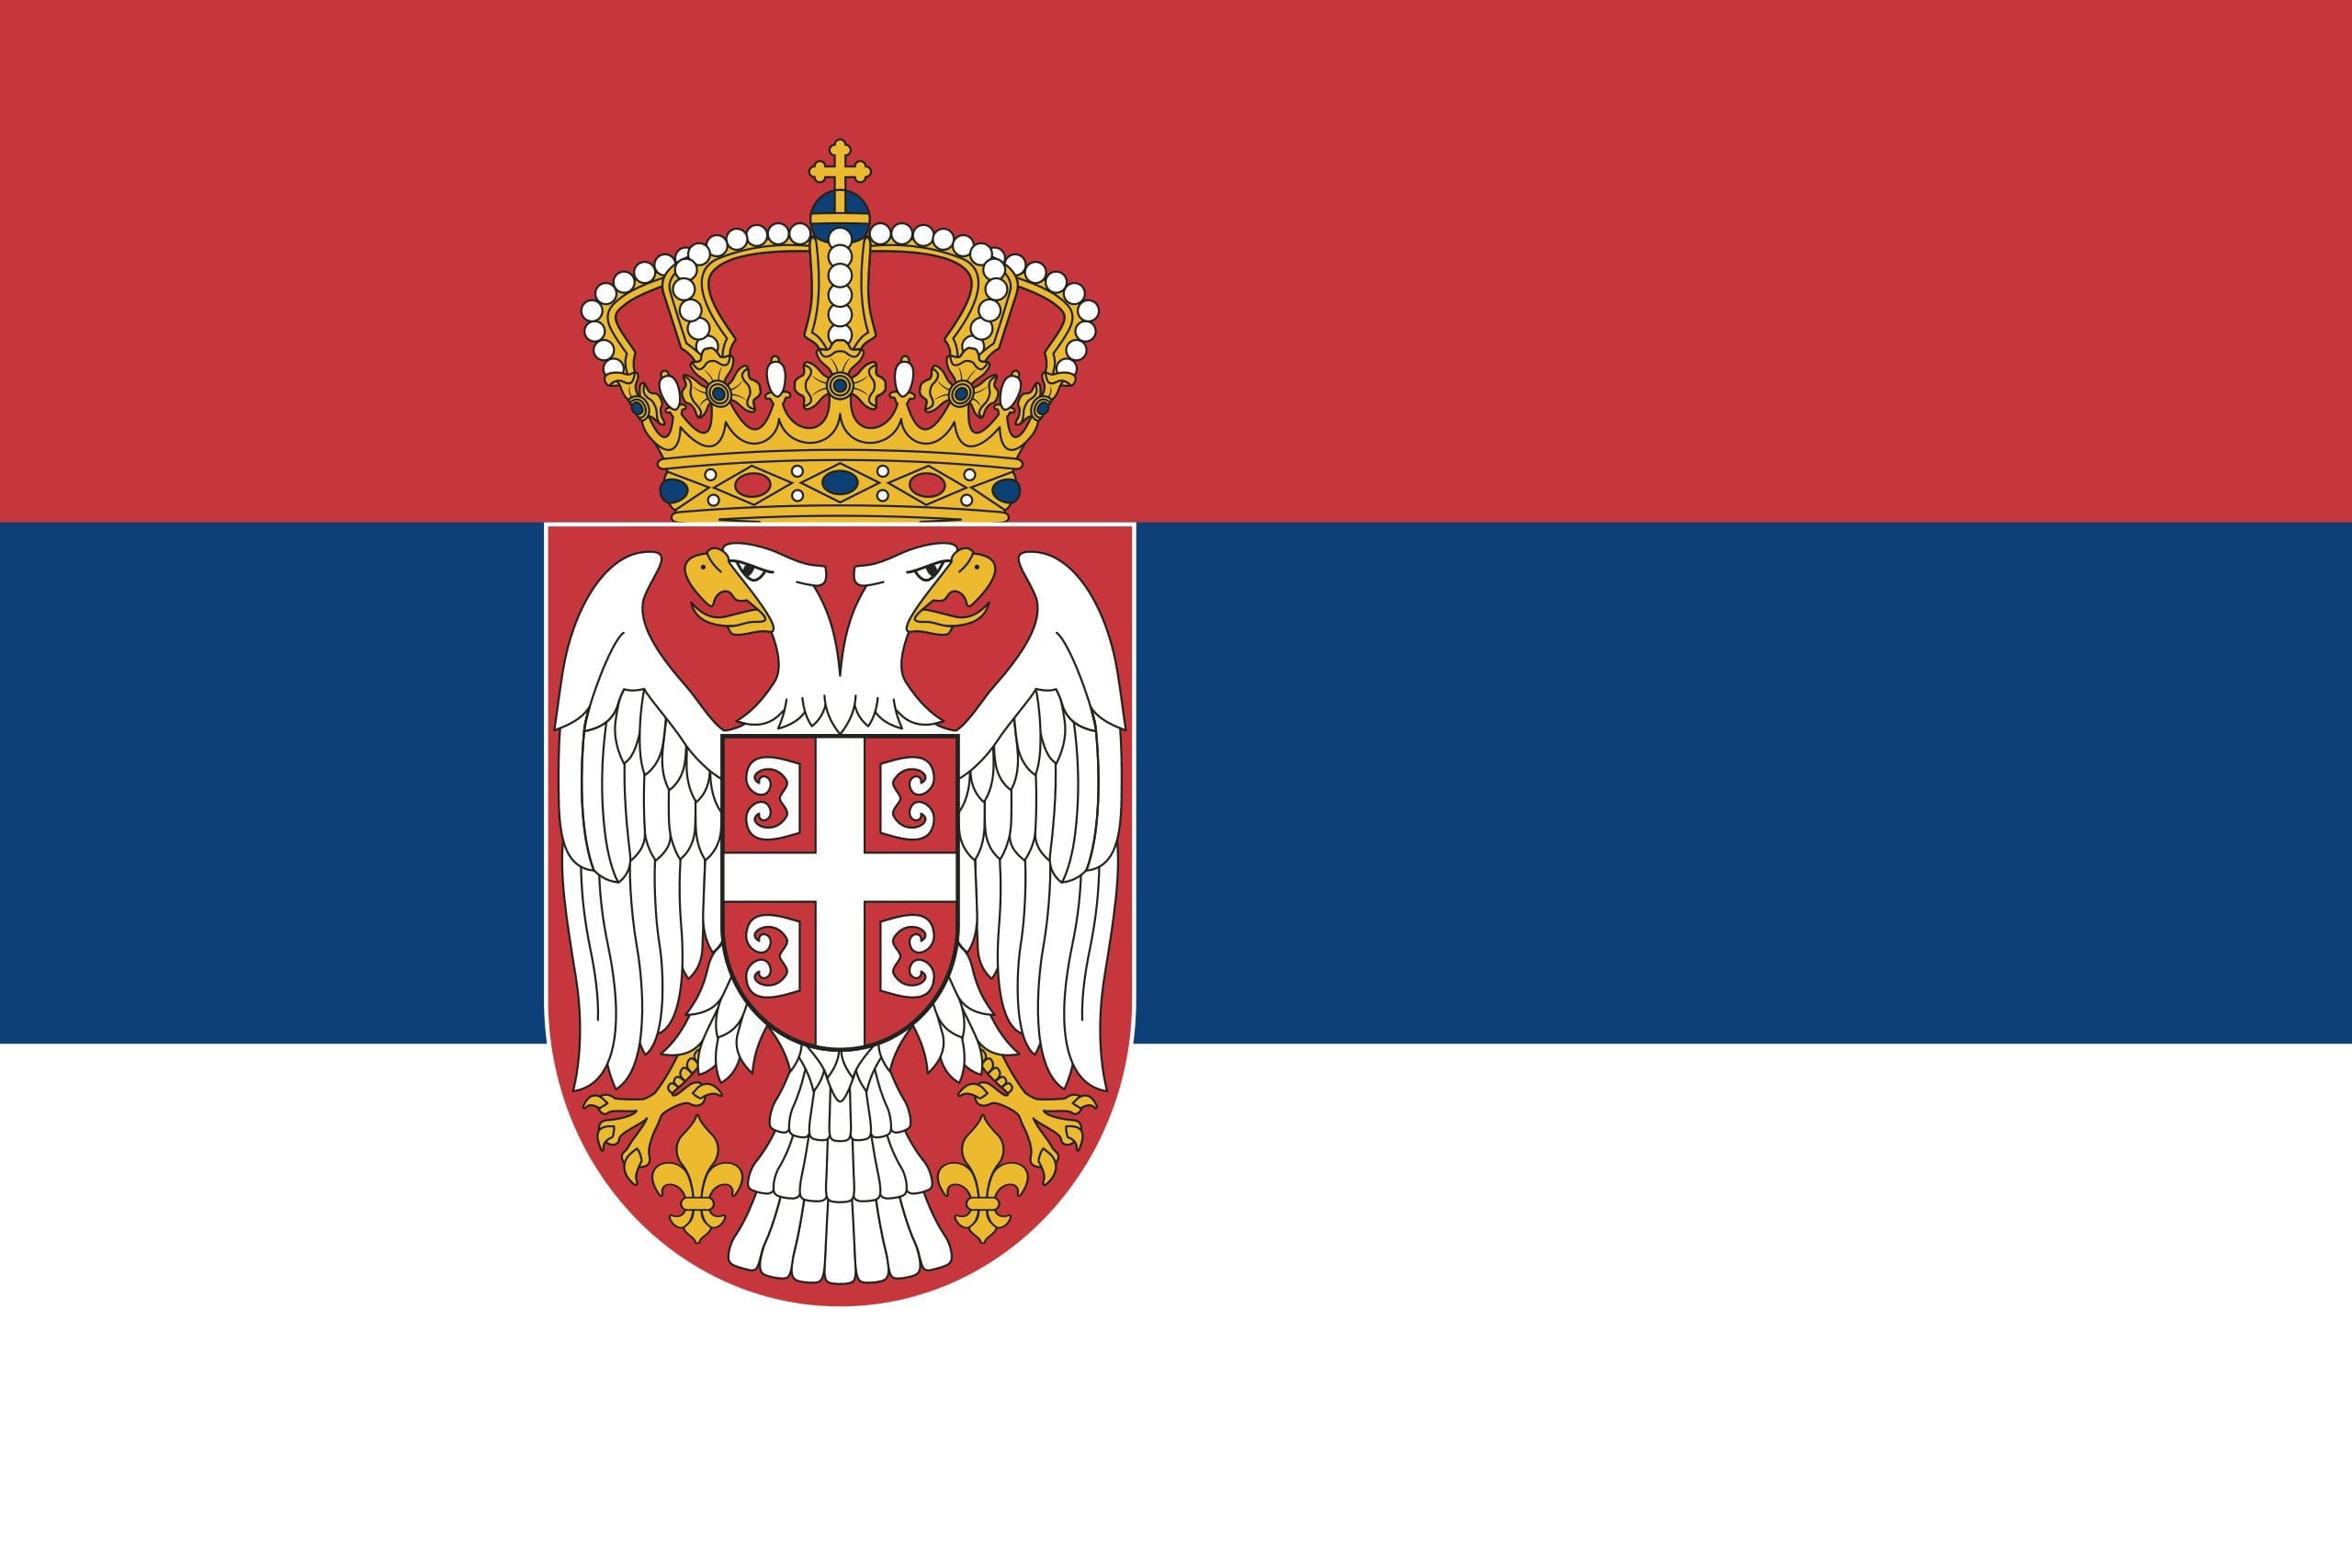 Facts of Serbia